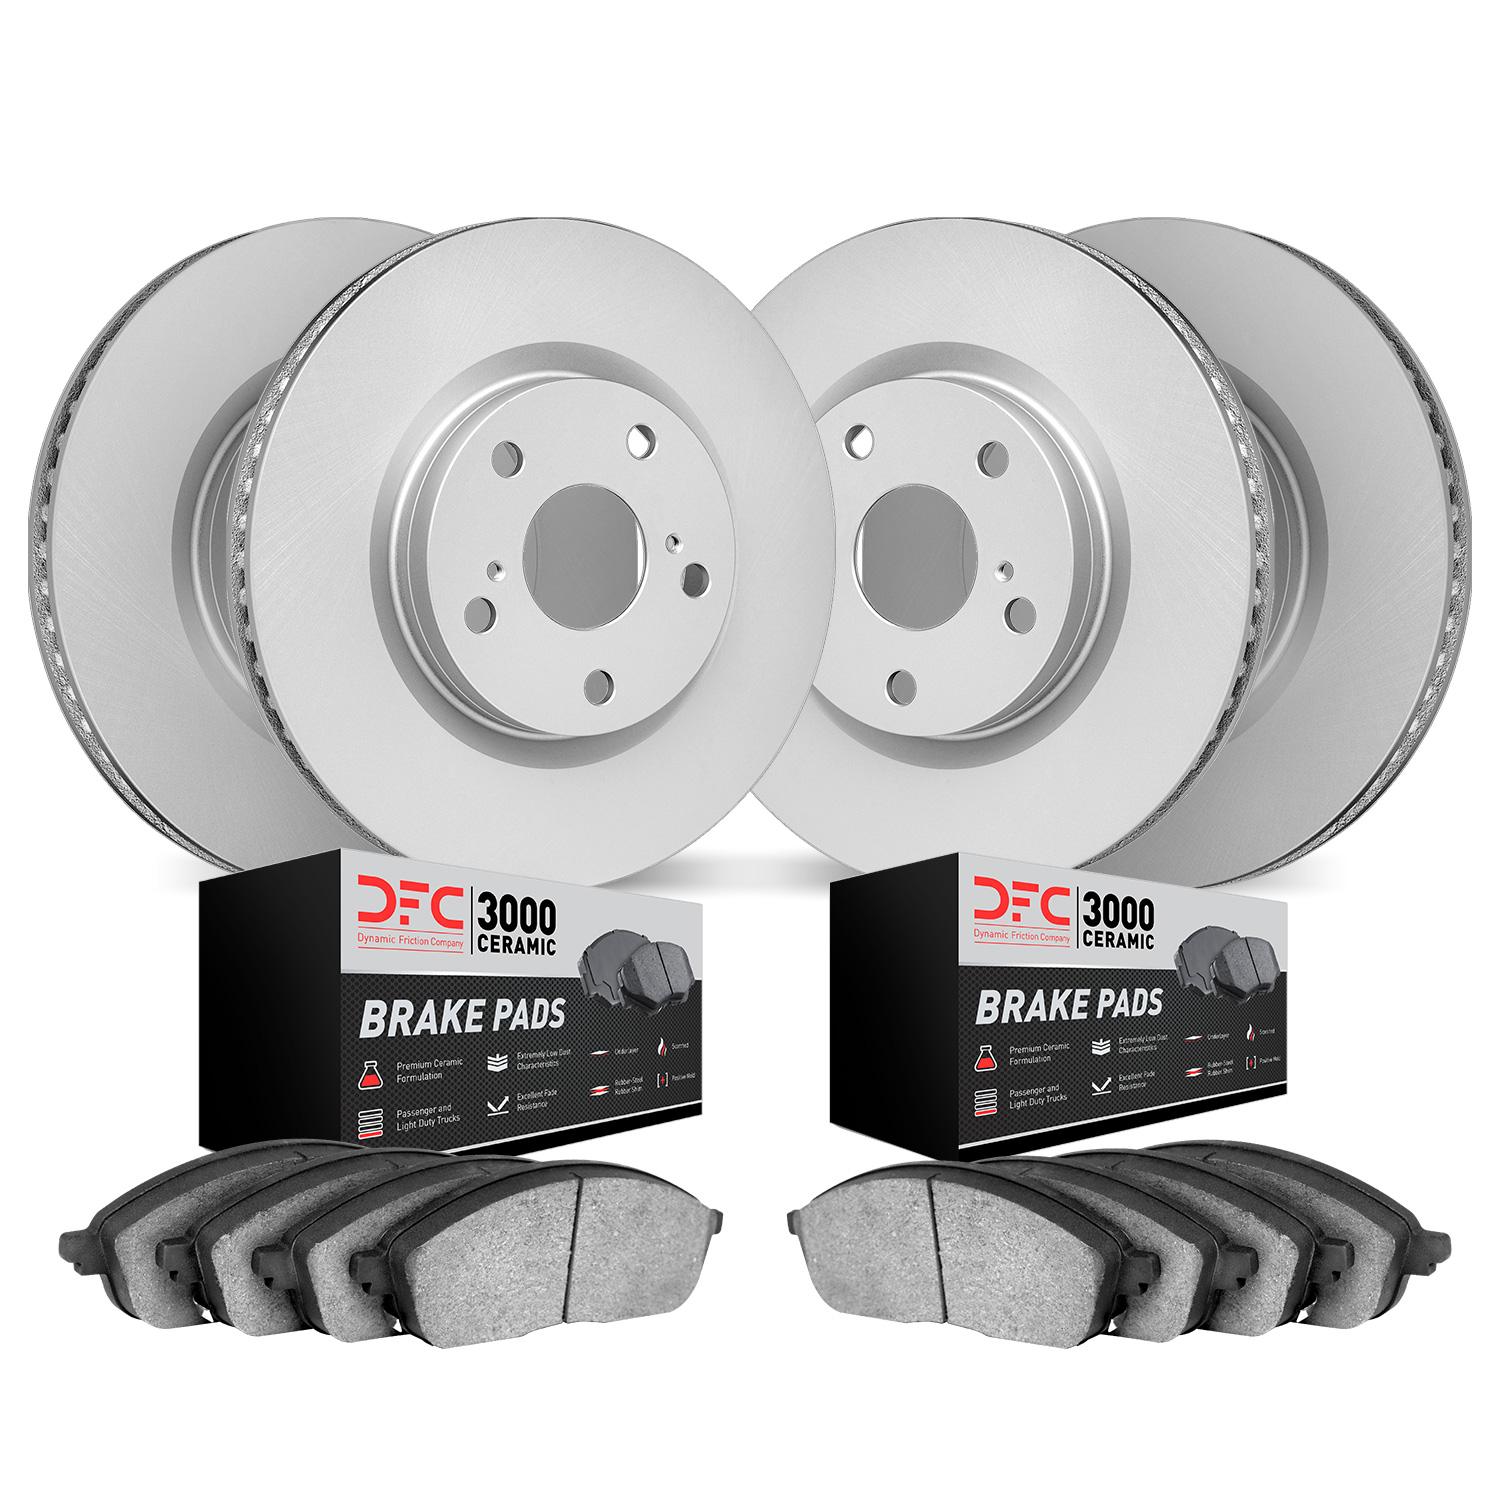 4304-75016 Geospec Brake Rotors with 3000-Series Ceramic Brake Pads Kit, 2014-2015 Lexus/Toyota/Scion, Position: Front and Rear